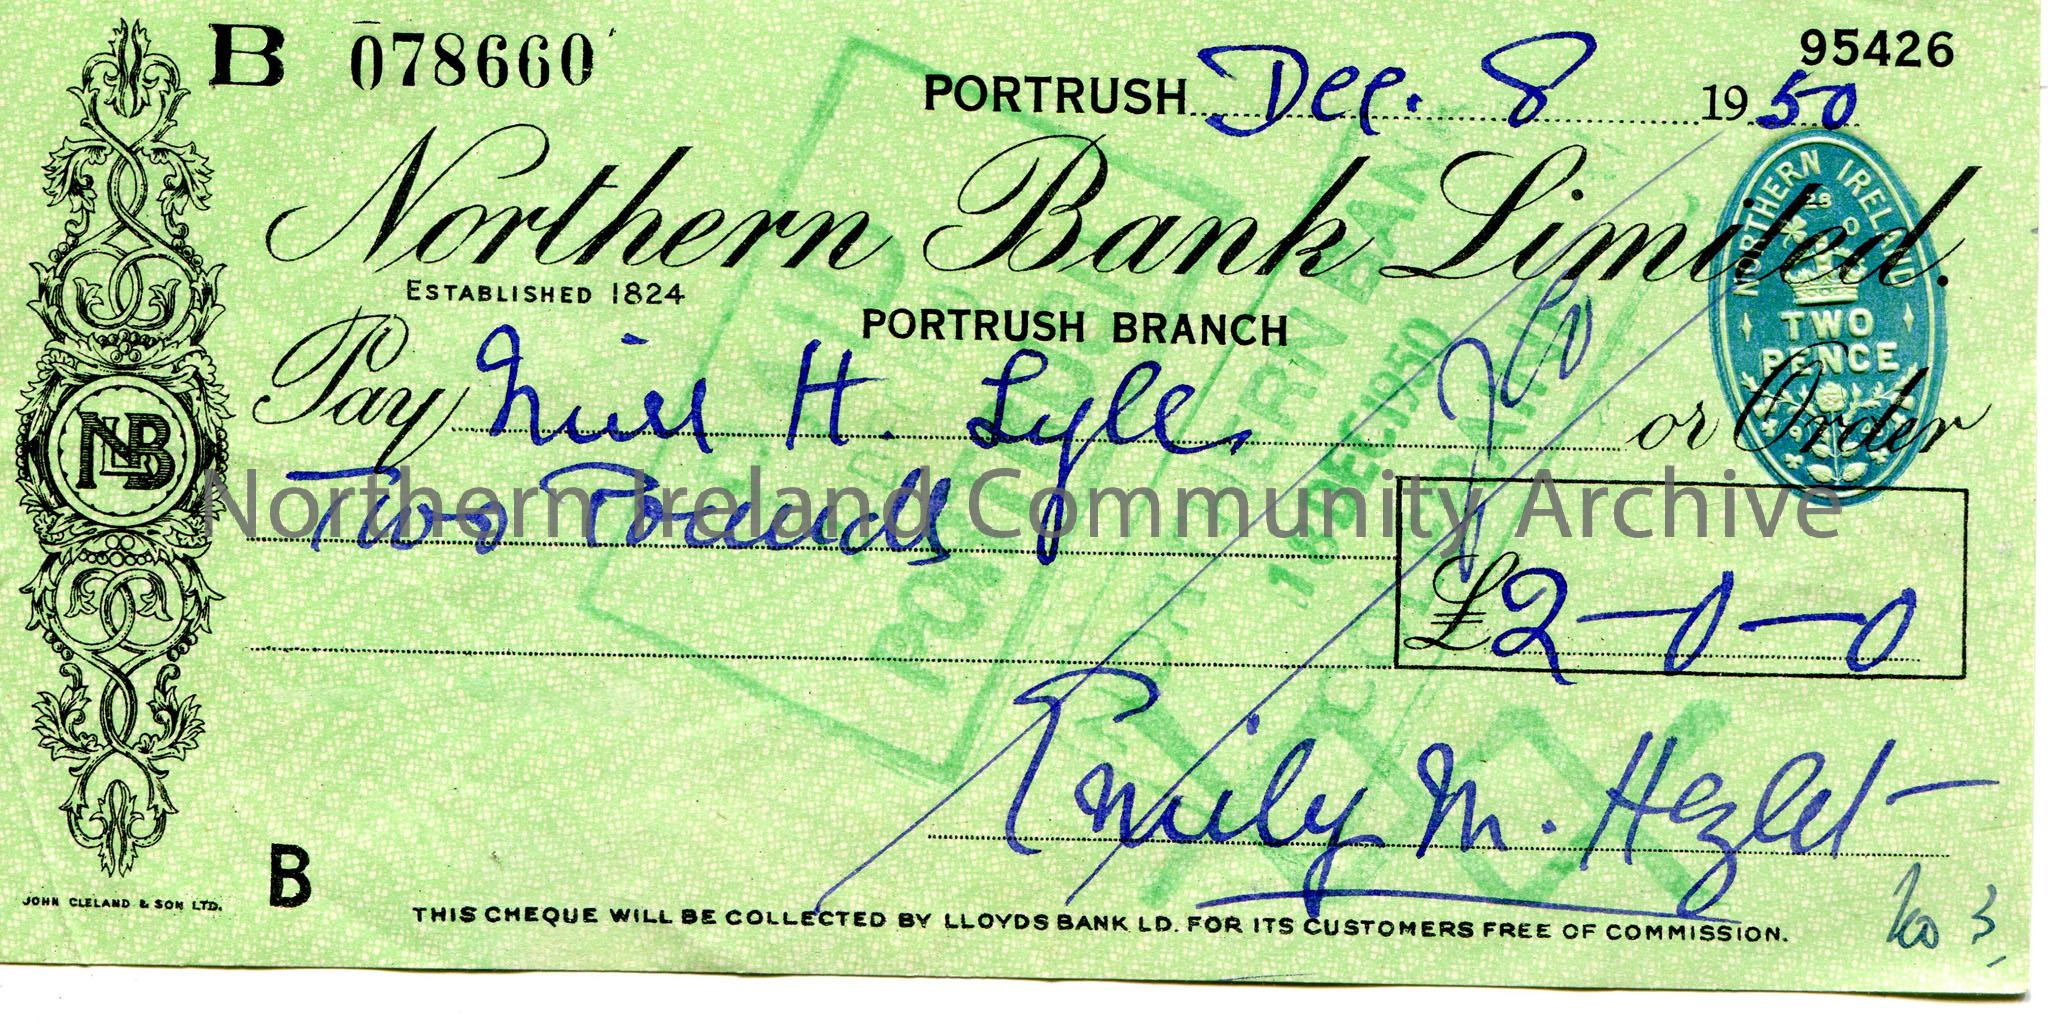 Northern Bank Limited, Portrush branch, cheque. Dated 8th December, 1950. Payable to Miss H. Lyle from Emily M. Hezlet for £2.0.0. Scored out on …